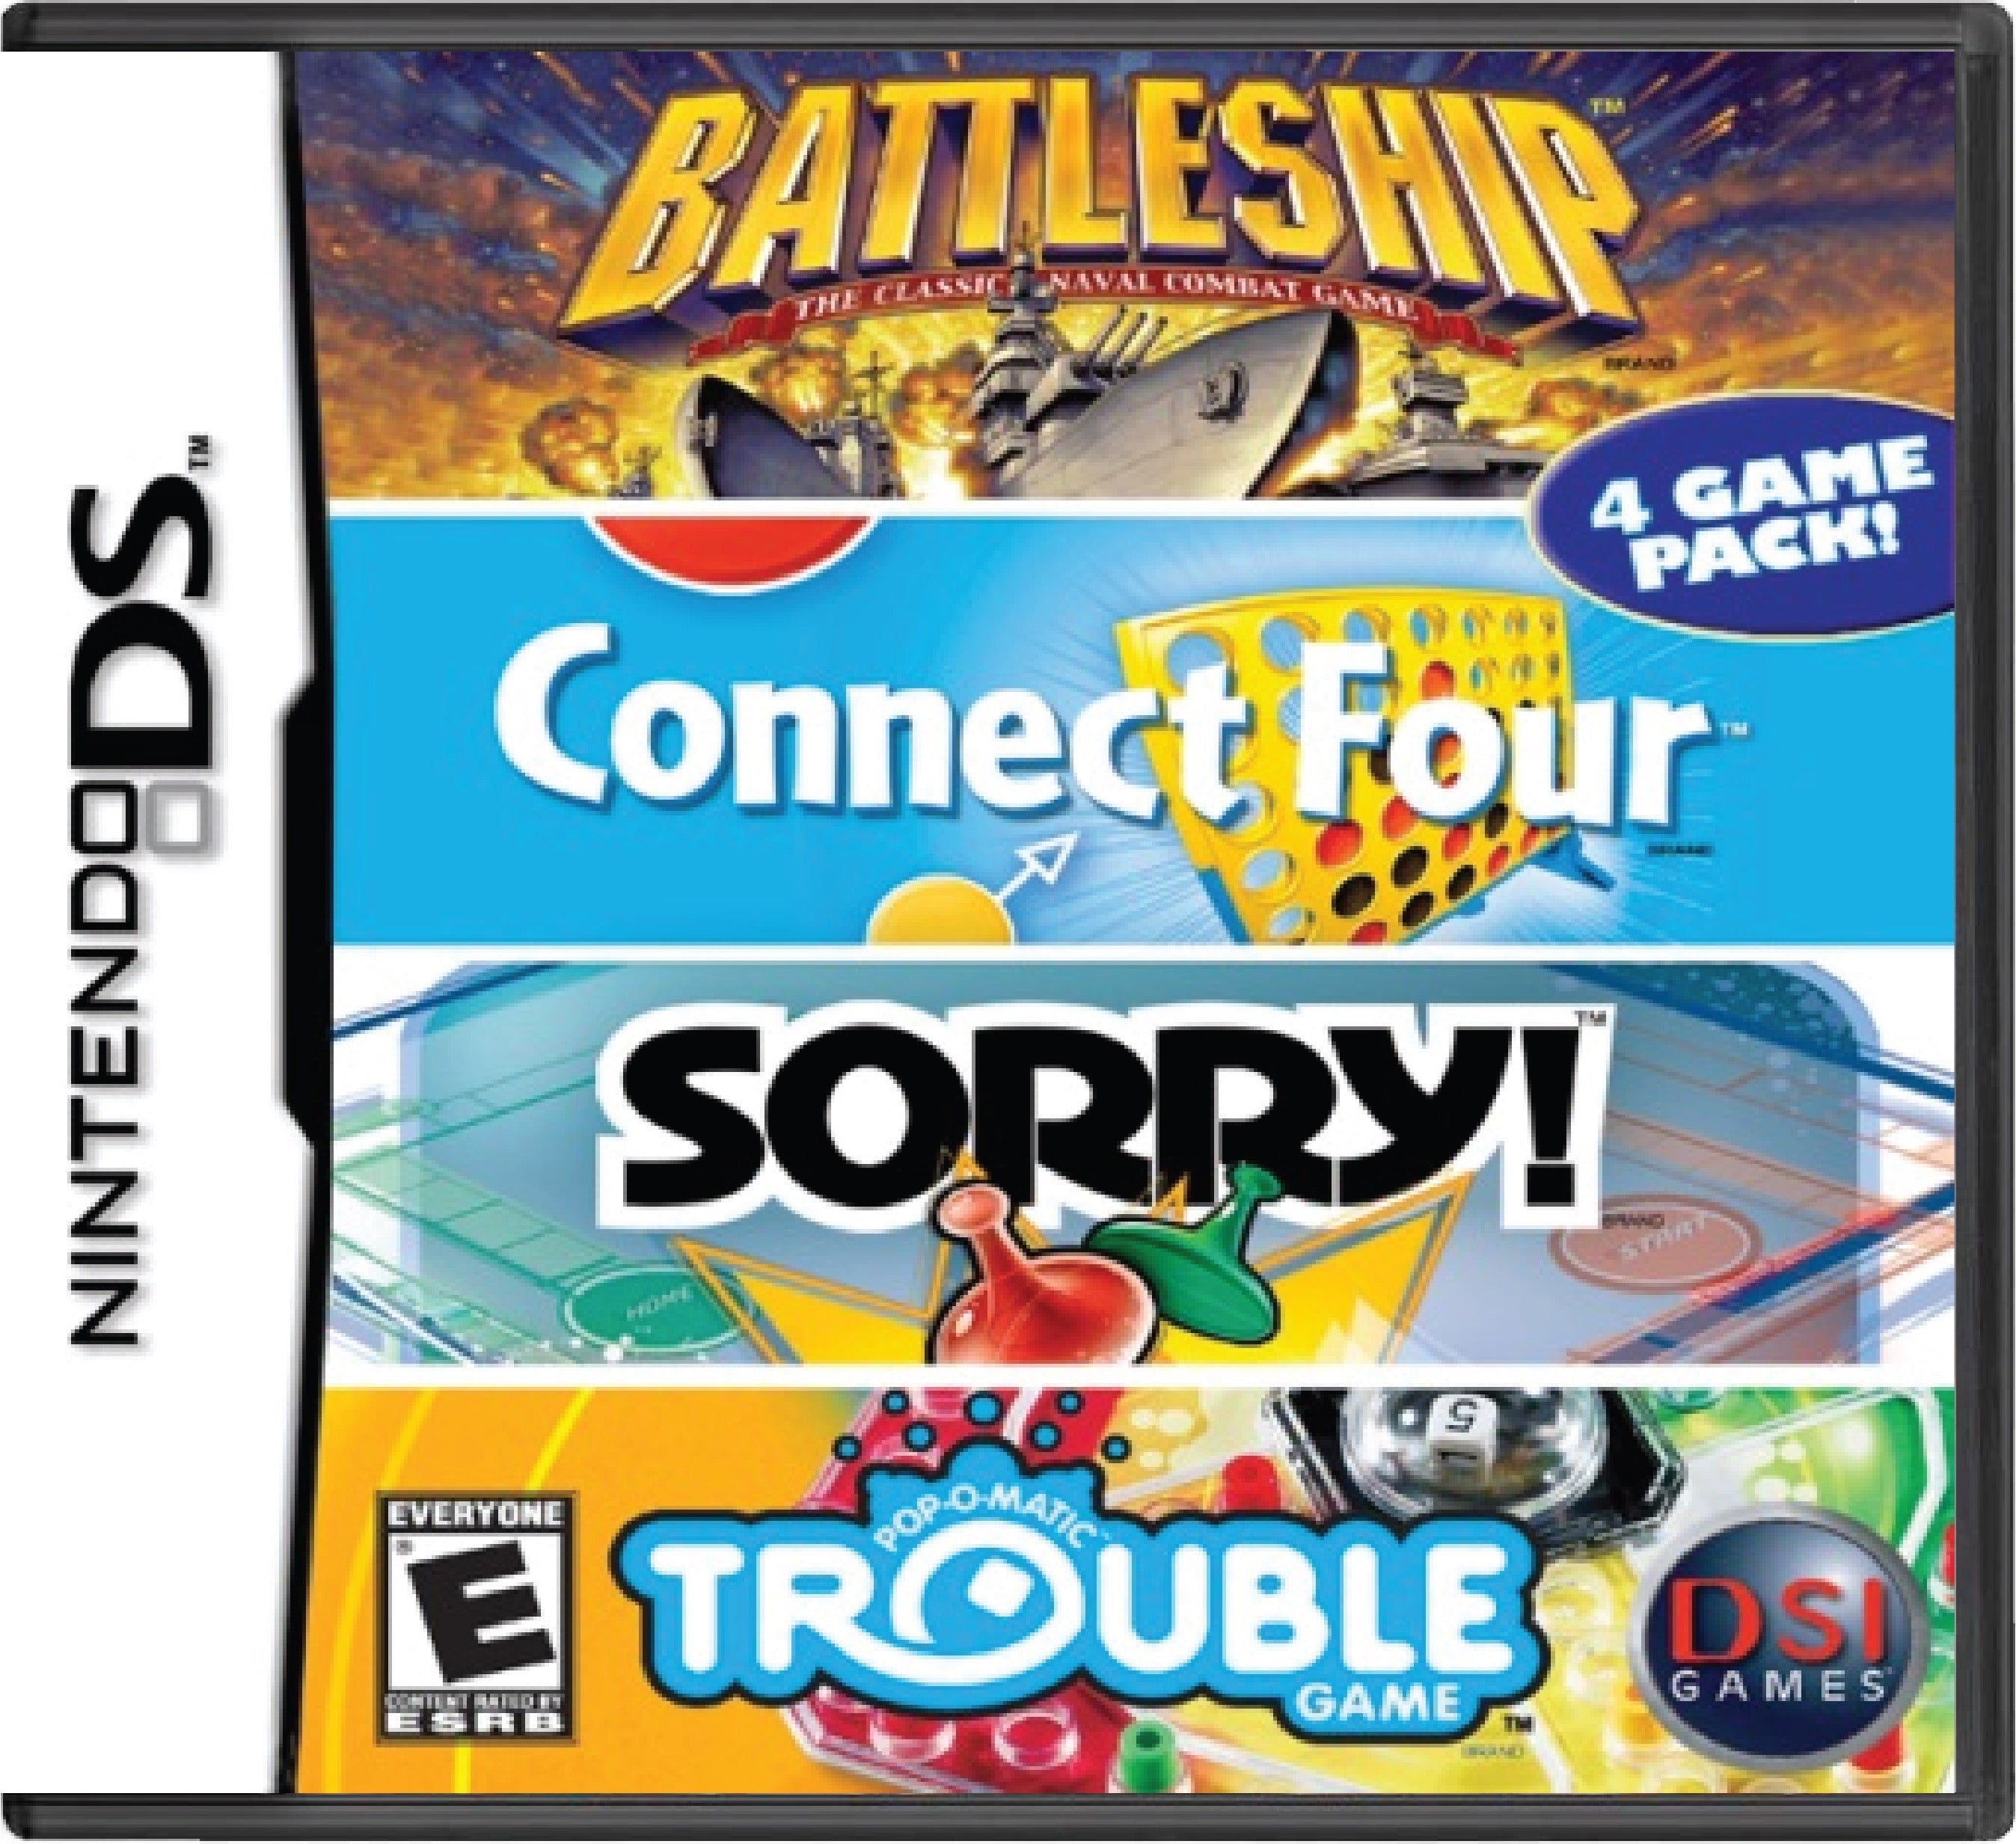 4 Game Pack Battleship + Connect Four + Sorry + Trouble Cover Art